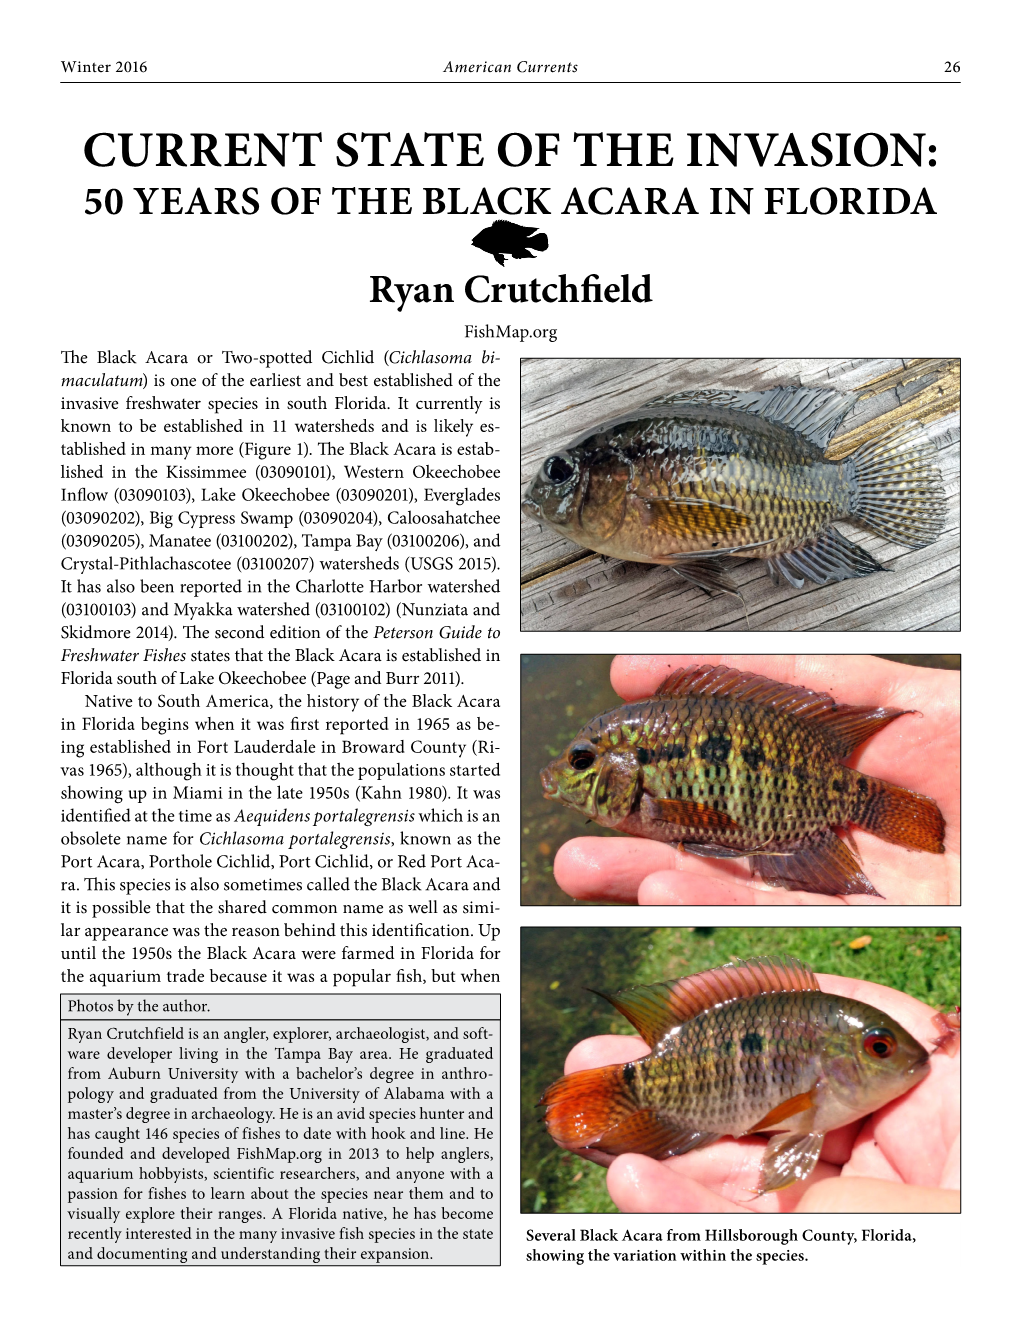 CURRENT STATE of the INVASION: 50 YEARS of the BLACK ACARA in FLORIDA Ryan Crutchfield